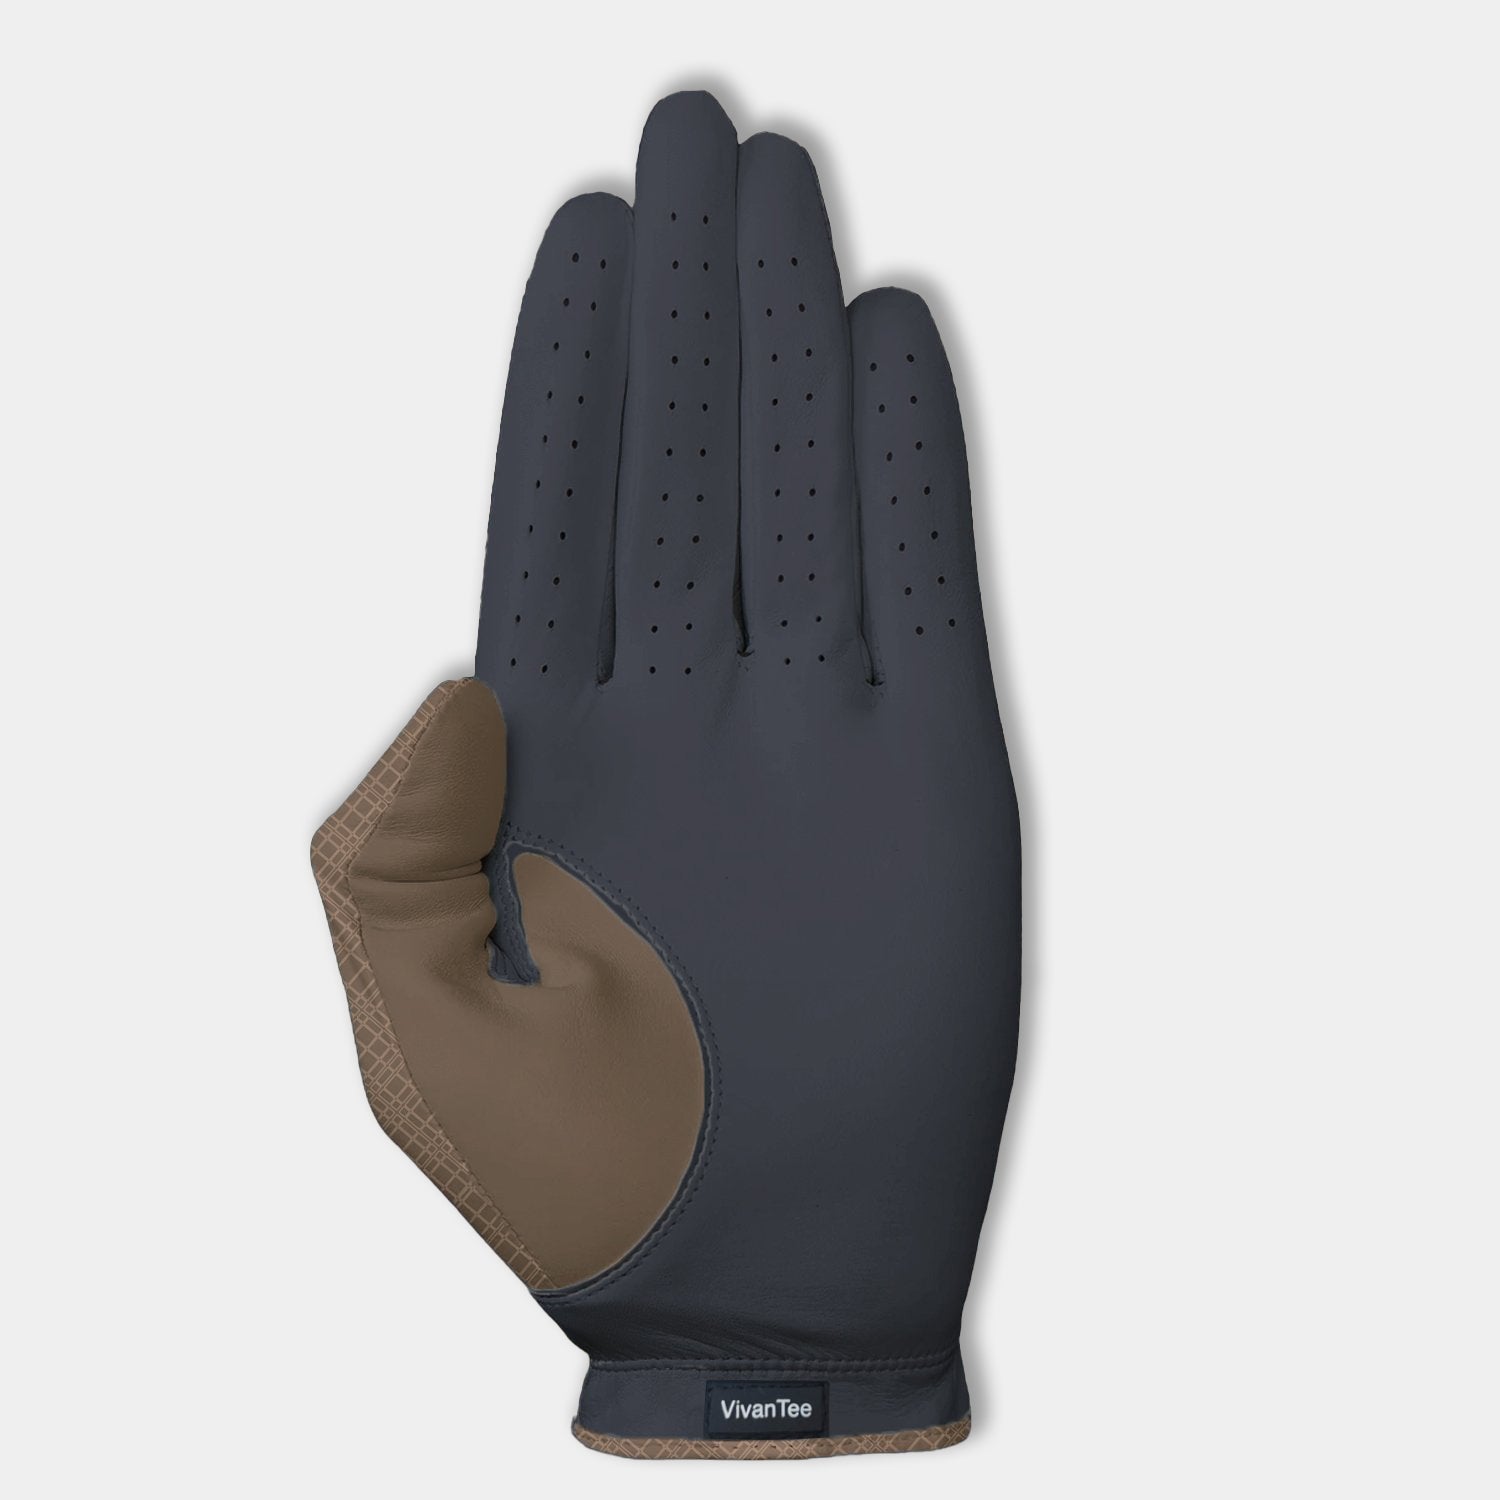 Navy Blue Golf Glove for women showing the palm and VivanTee logo.